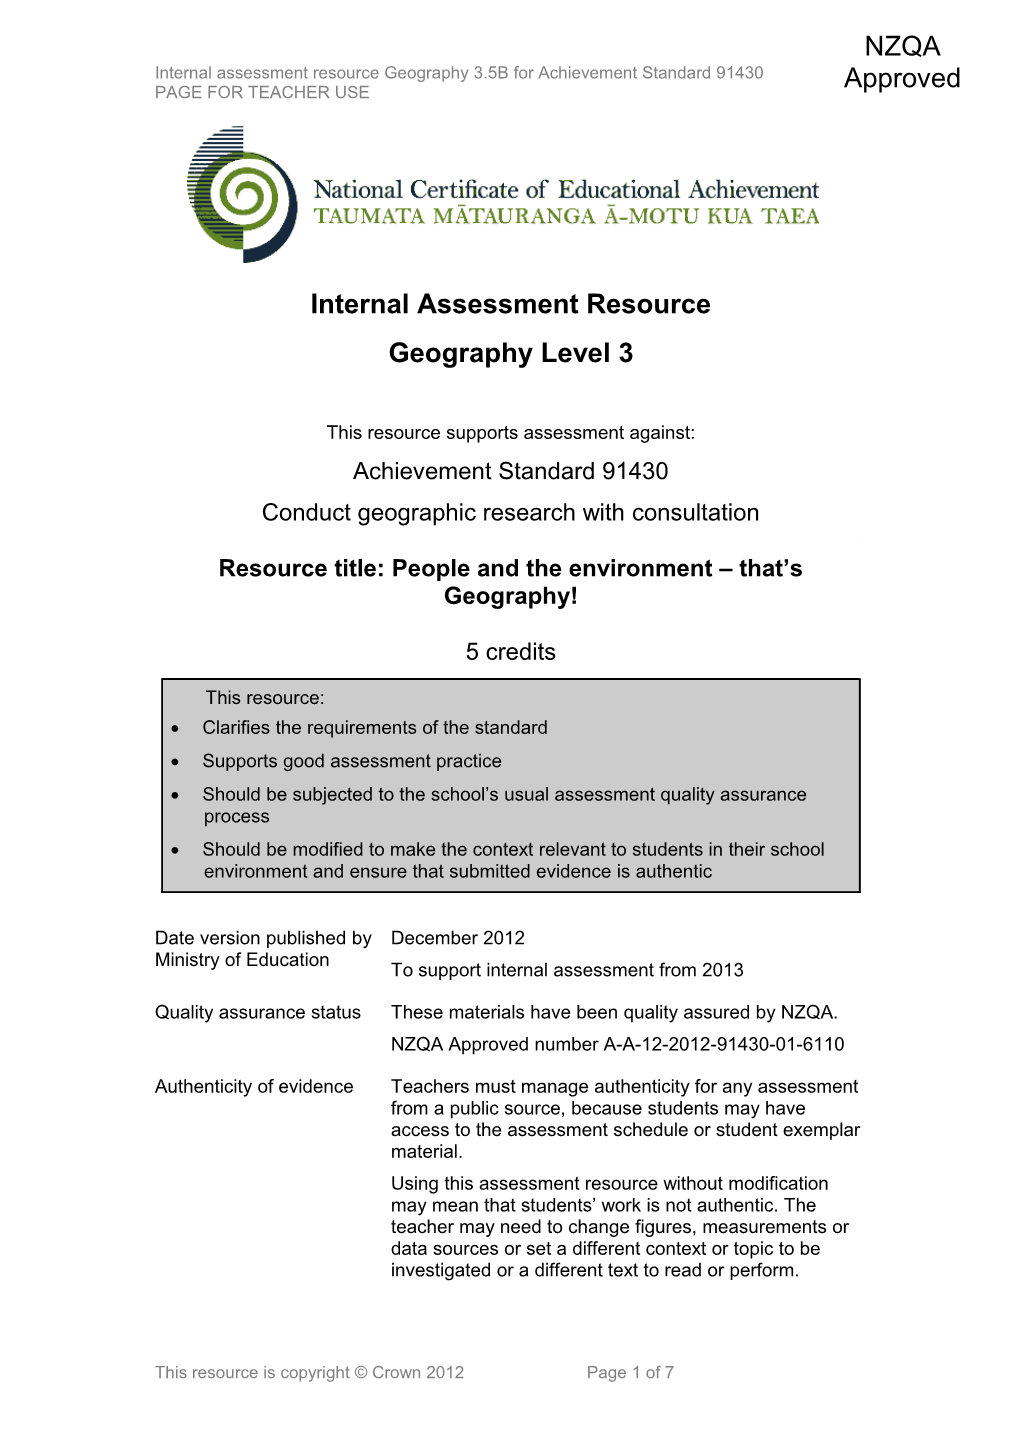 Level 3 Geography Internal Assessment Resource